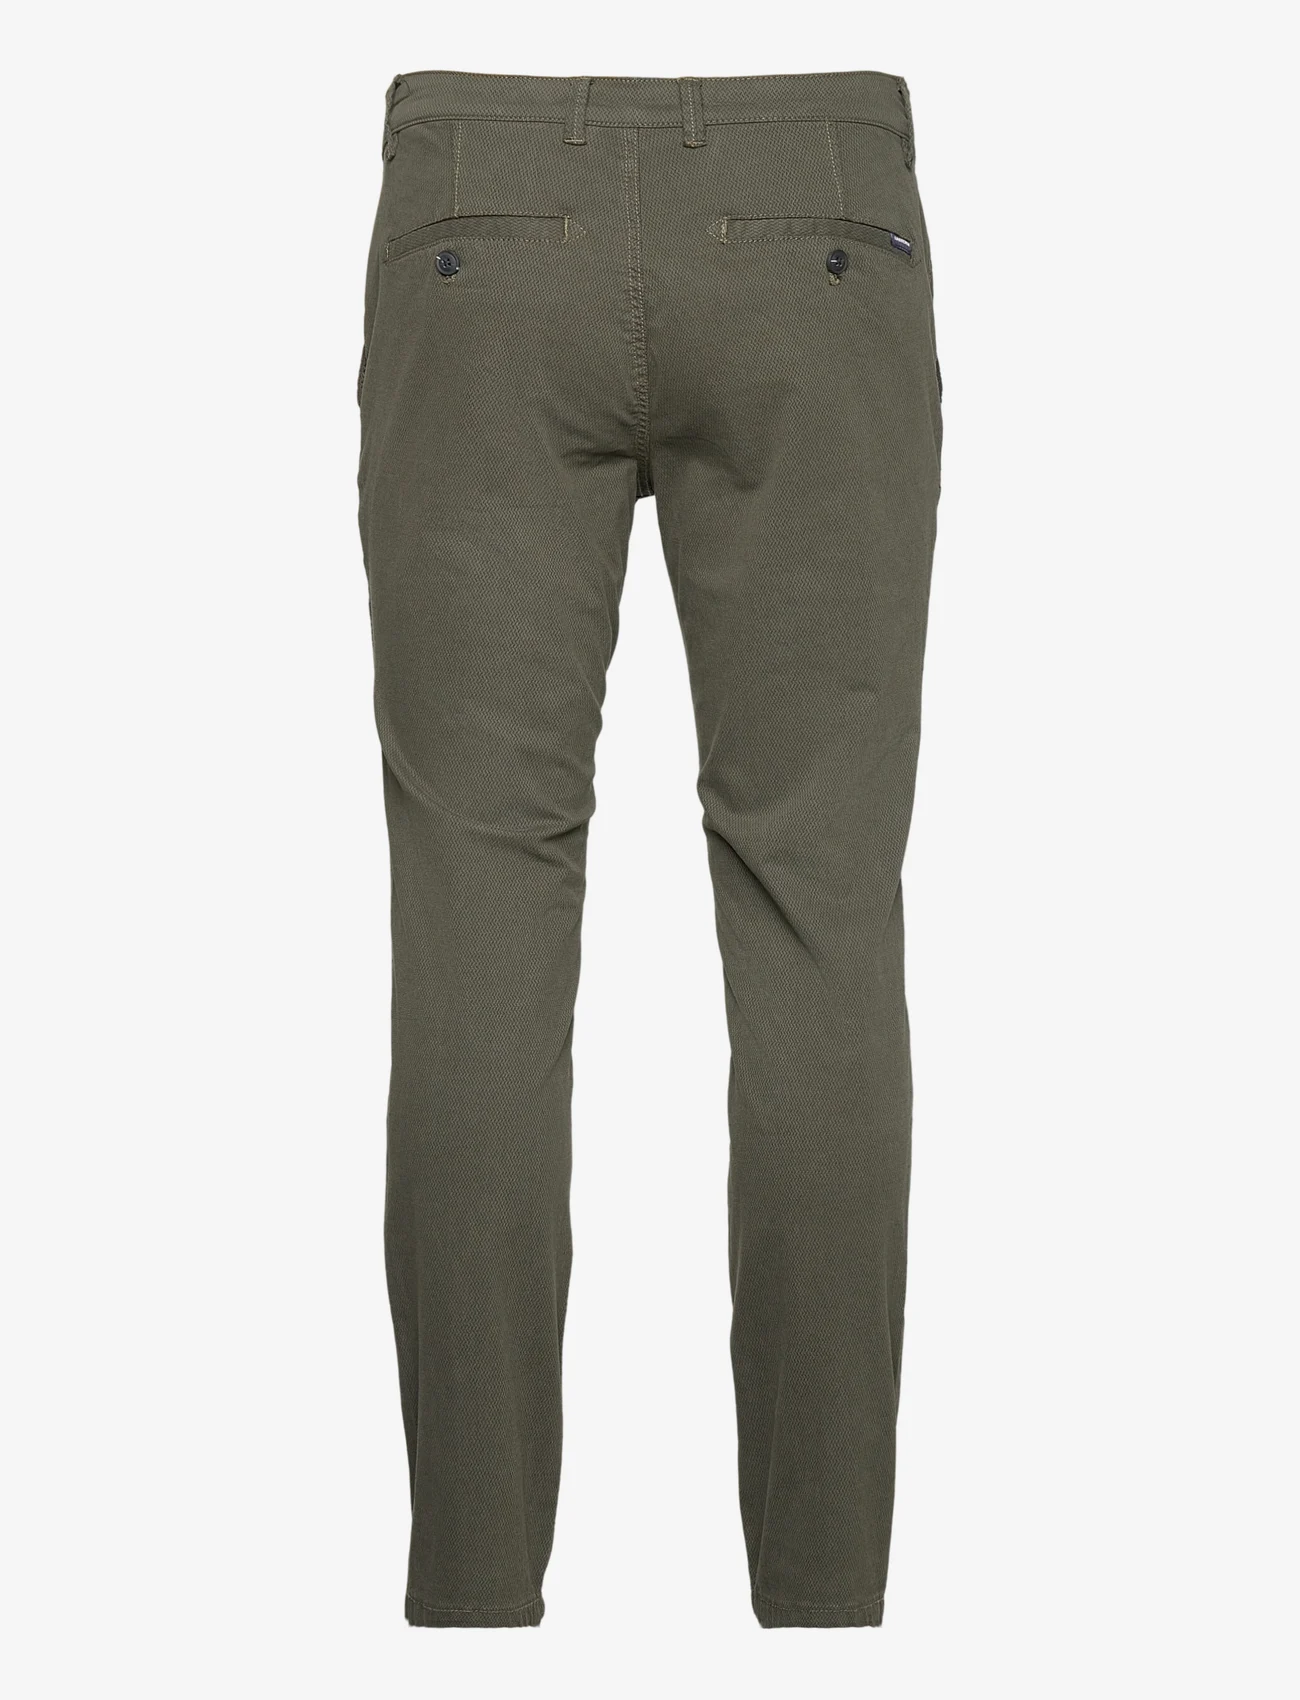 Lindbergh - Structure superflex chinos - chinos - army - 1